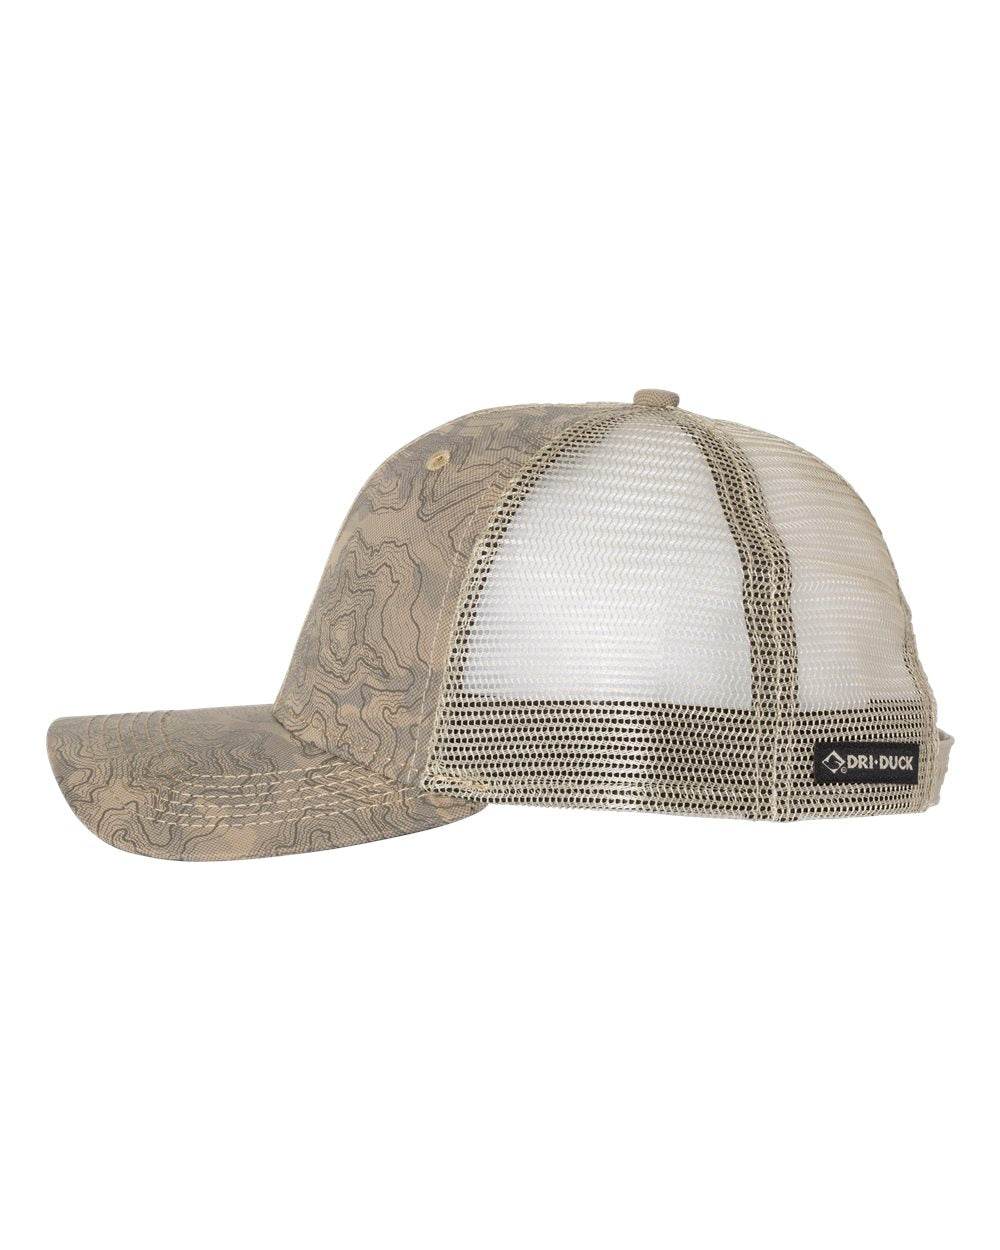 Image of the DRI DUCK Territory Trucker Cap in Khaki, showcasing its classic trucker design and khaki color, perfect for outdoor enthusiasts.